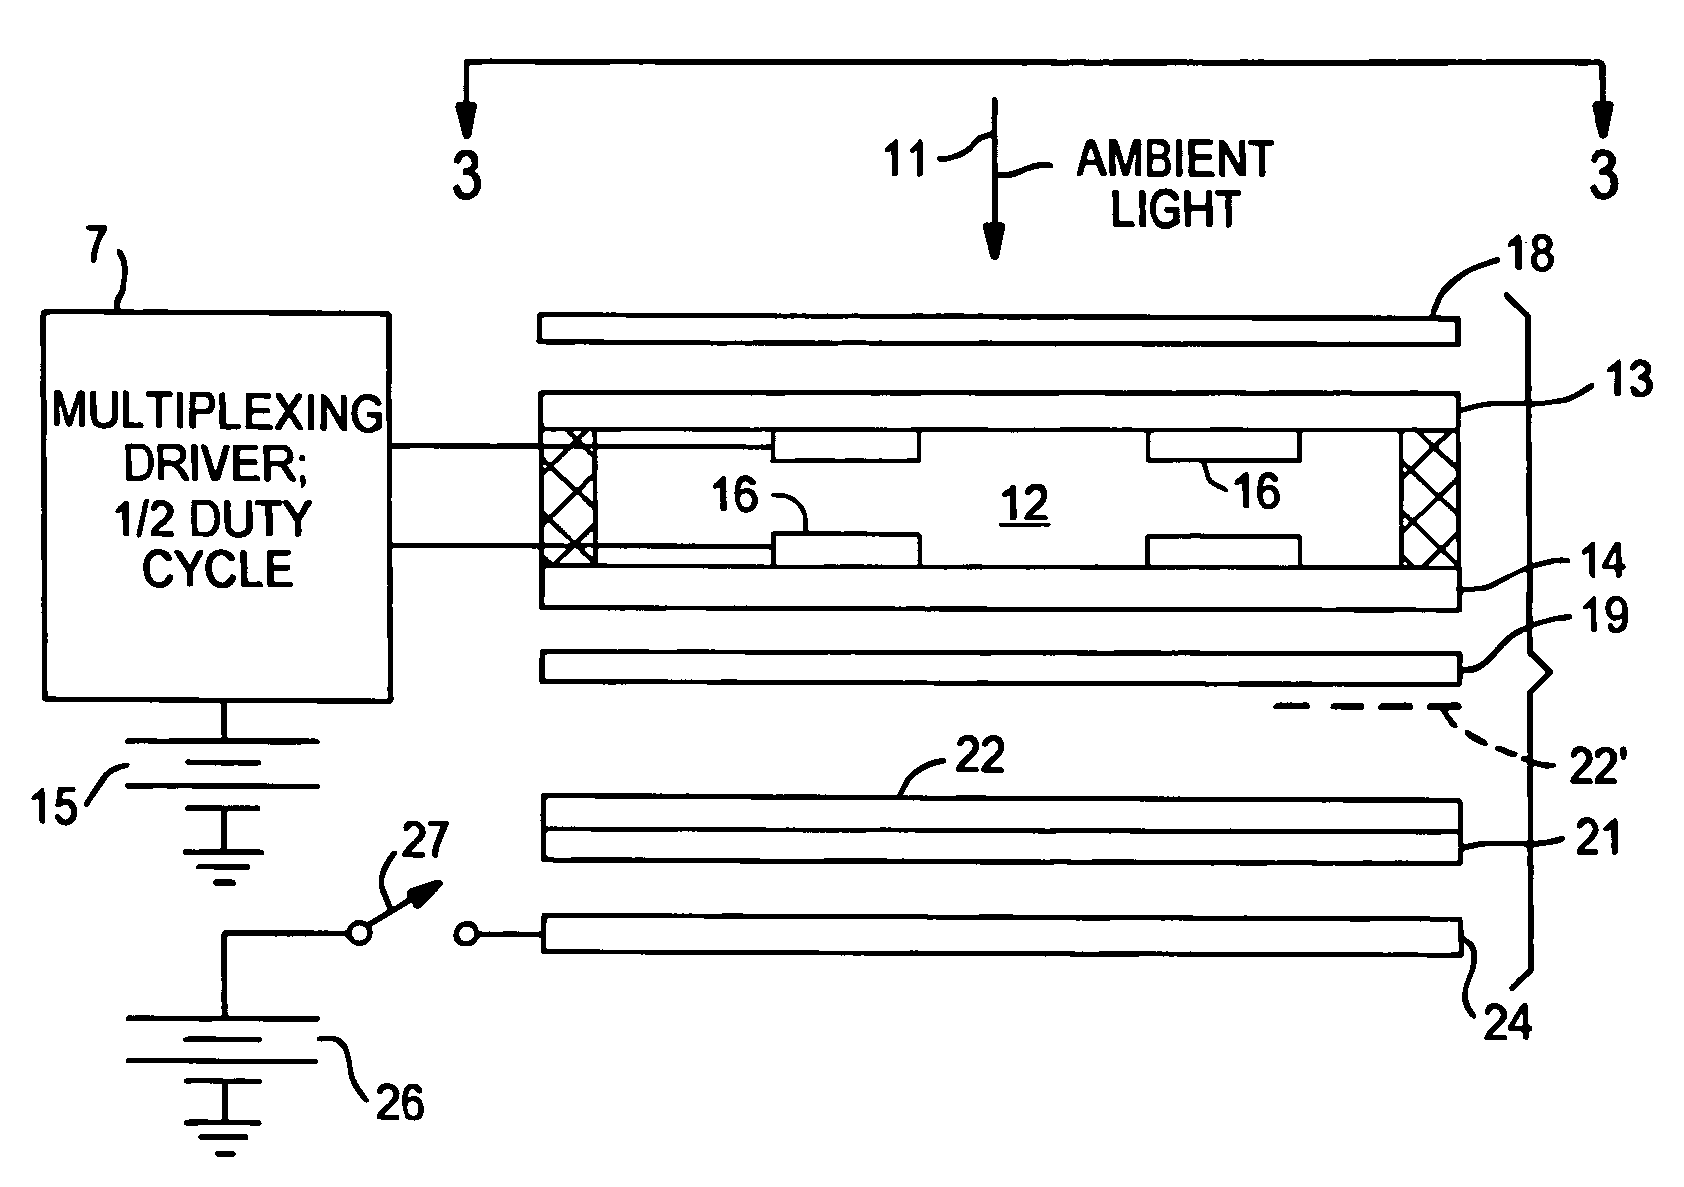 Liquid crystal display with fluorescent material